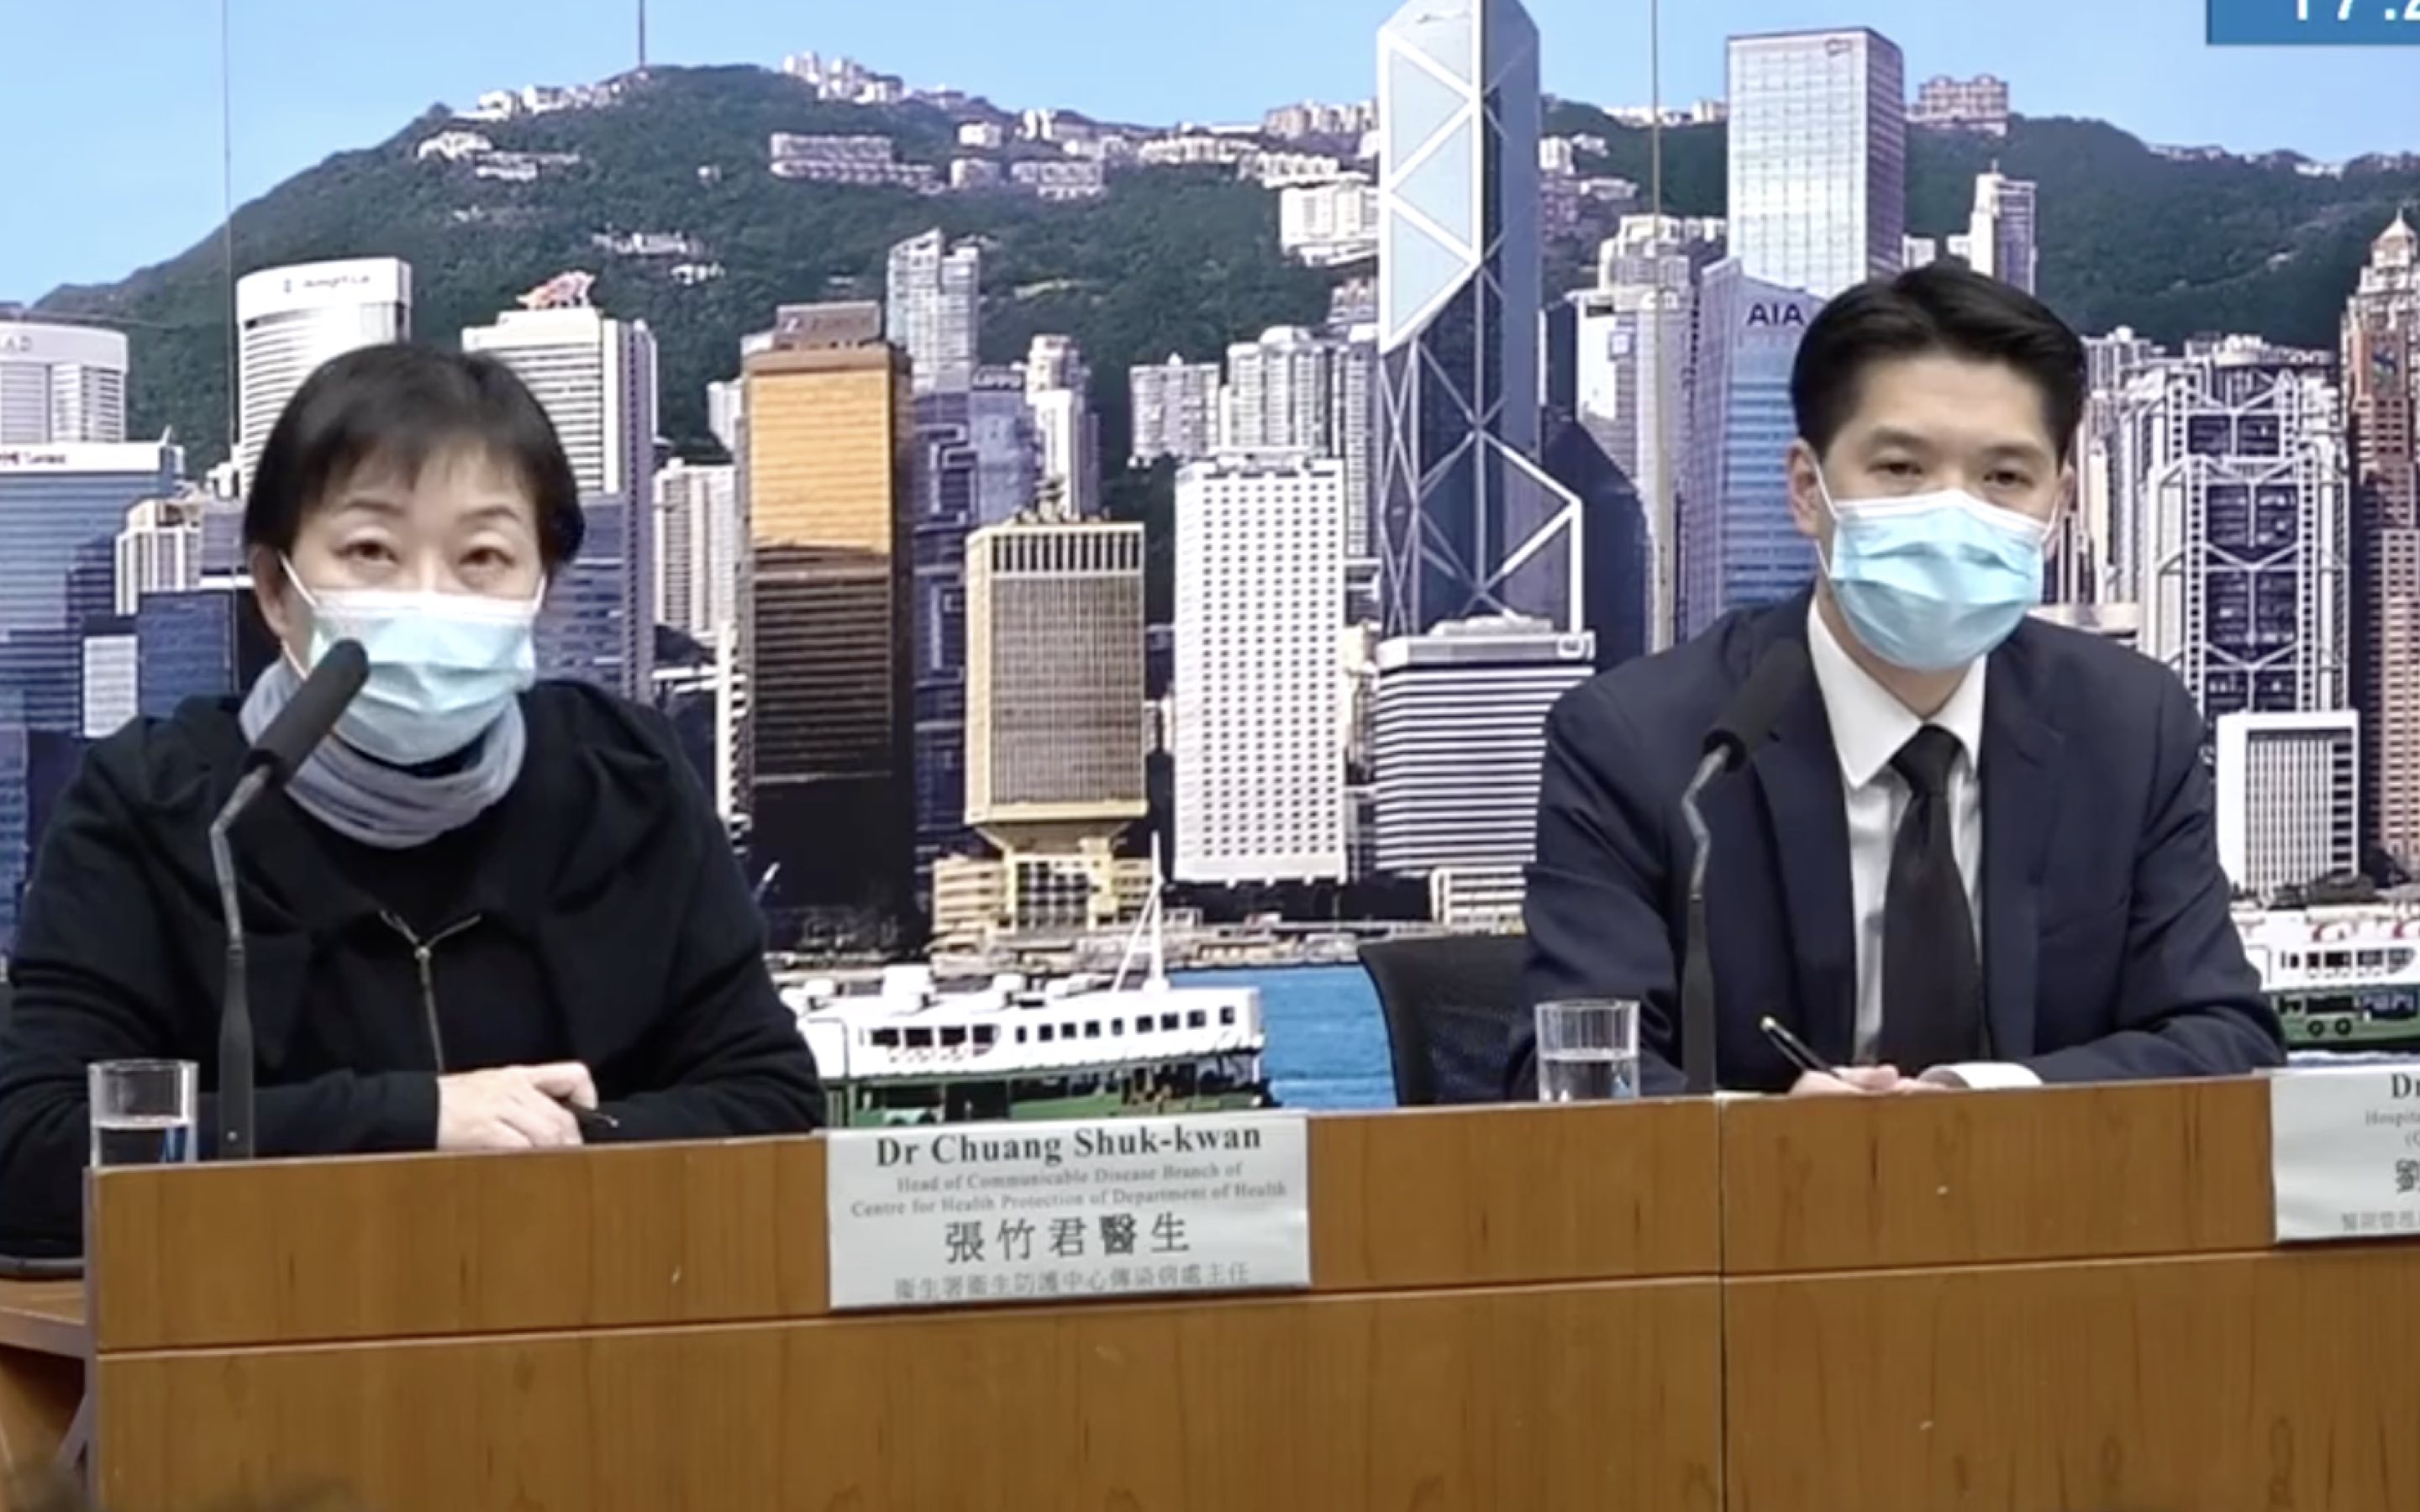 Chuang Shuk-kwan from the Centre for Health Protection and Lau Ka-hin from the Hospital Authority update reporters on the two latest confirmed Wuhan coronavirus cases in Hong Kong. Screengrabs via Facebook video/Apple Daily.